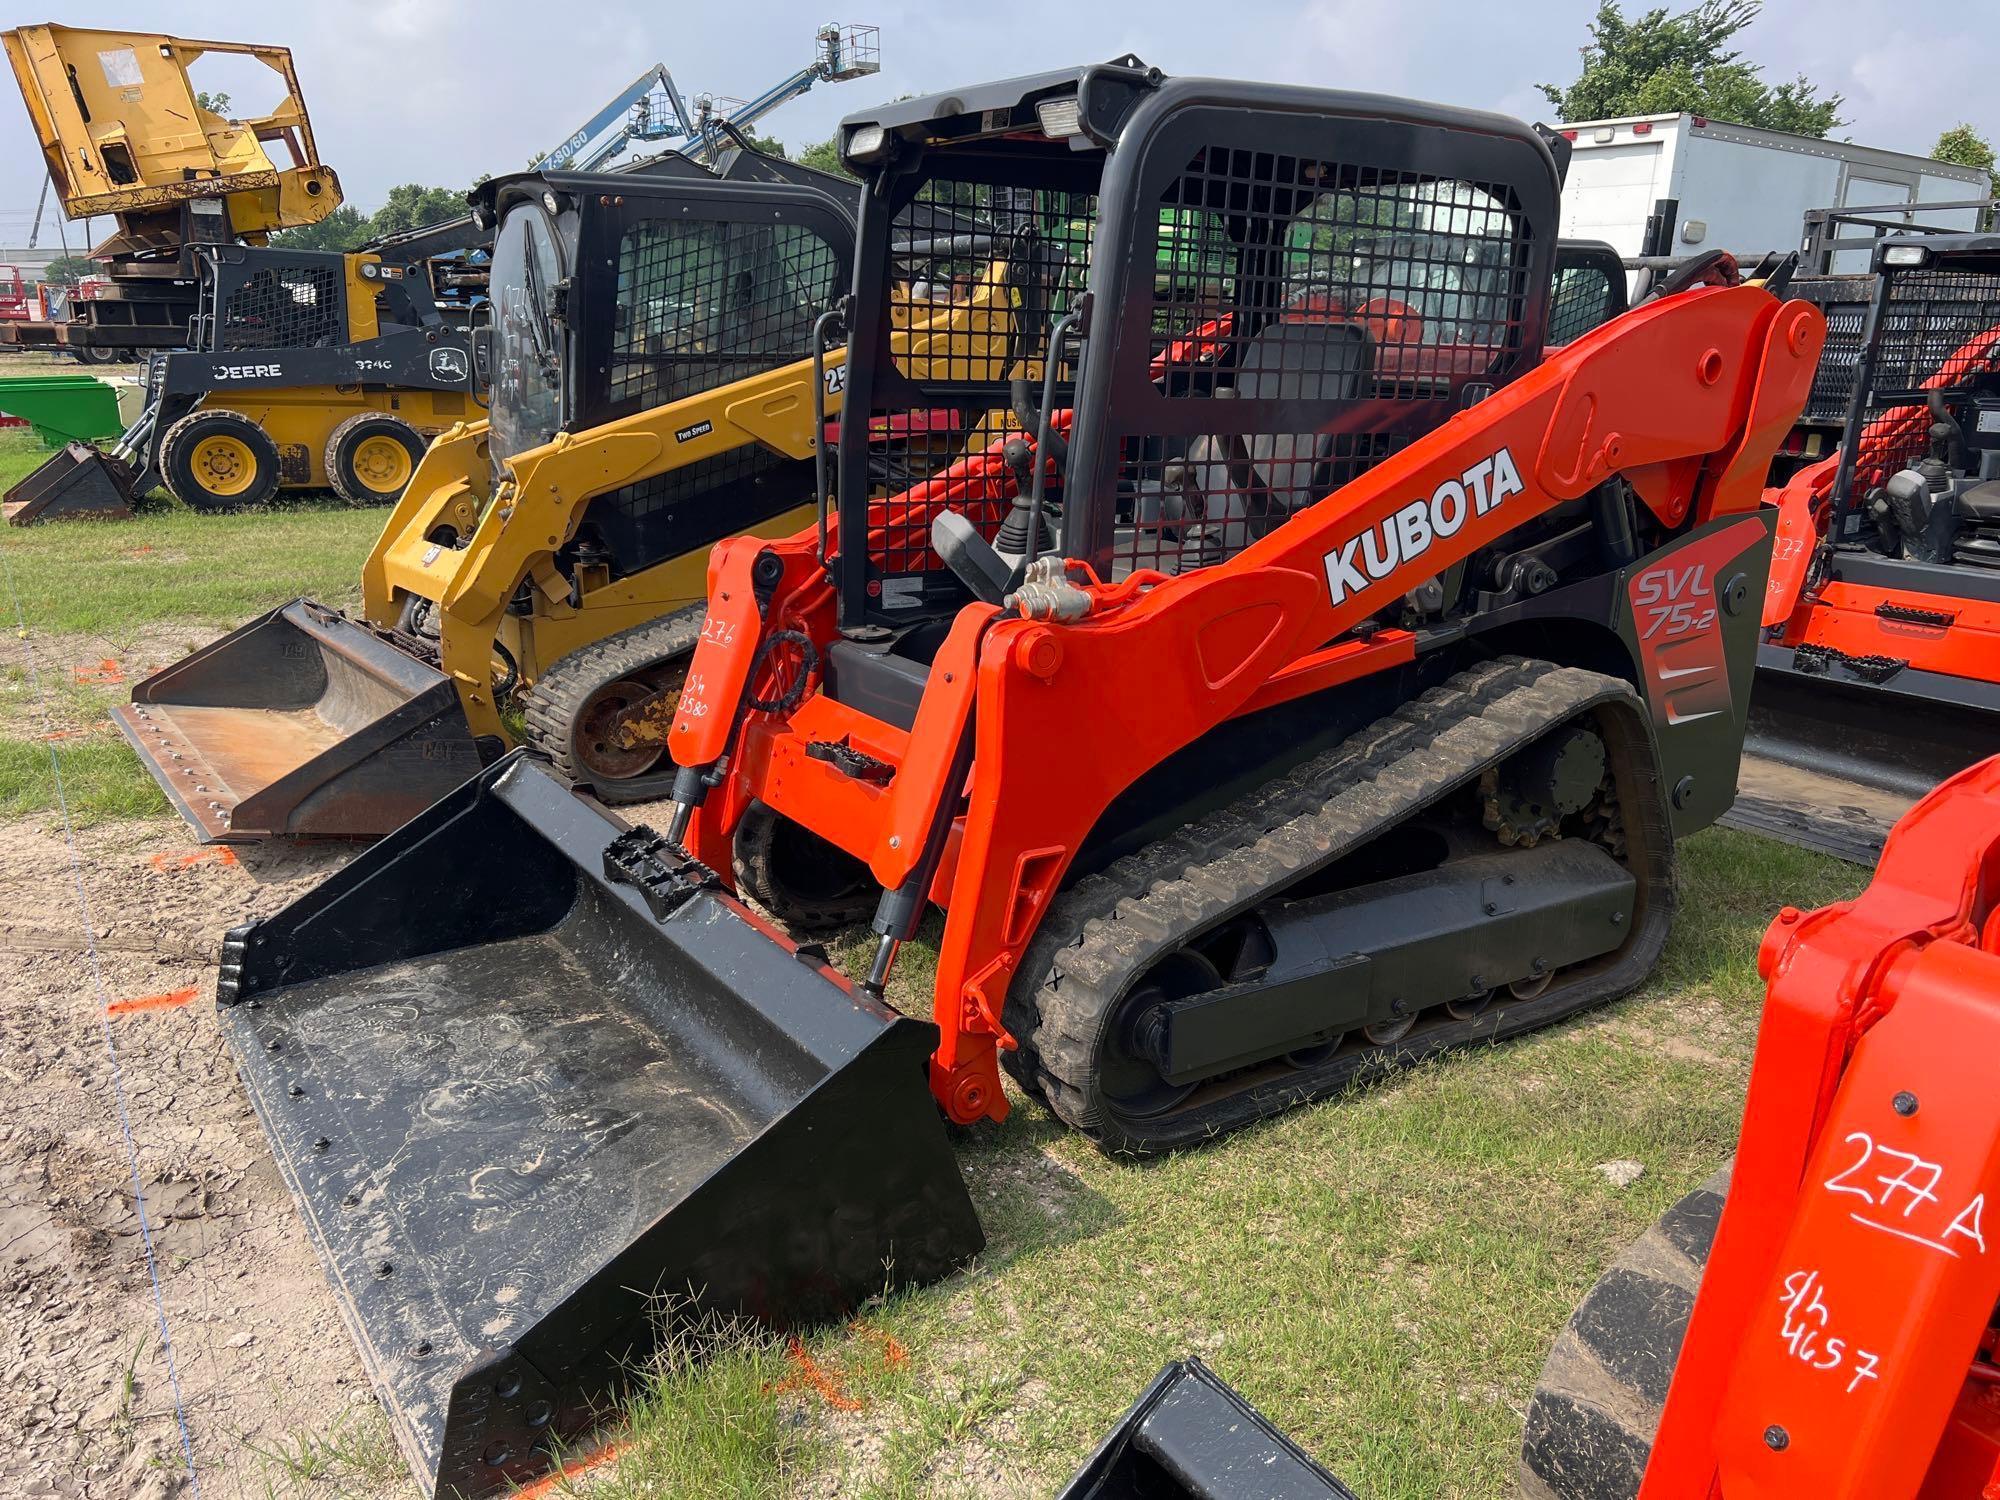 2021 KUBOTA SV75 RUBBER TRACKED SKID STEER SN:43580 powered by Kubota diesel engine, equipped with